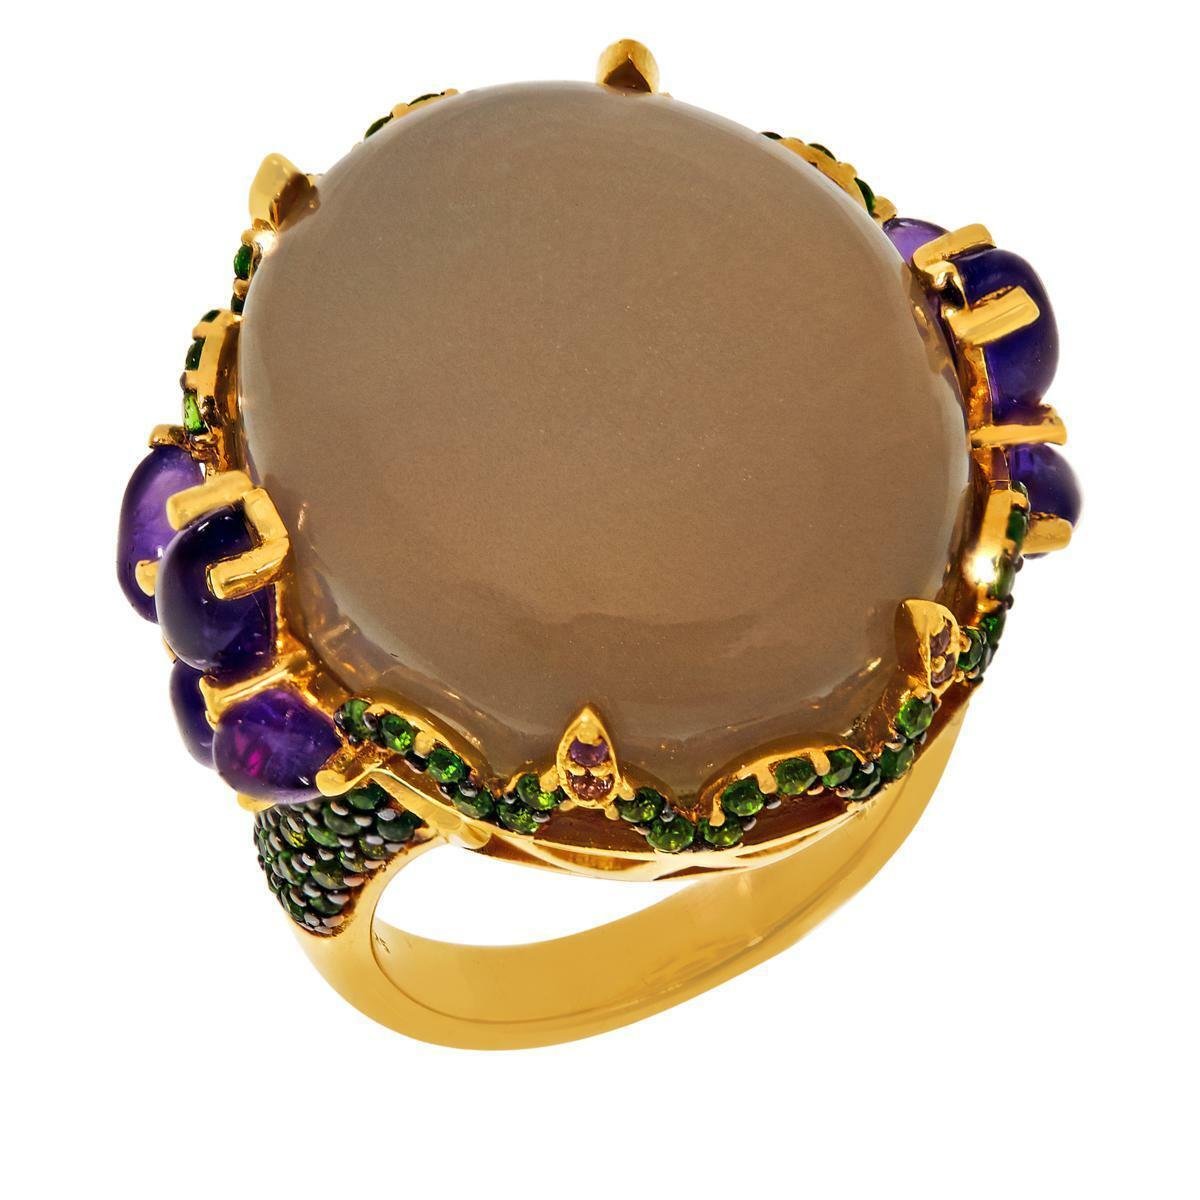 Colleen Lopez Gold-Plated Moonstone, Chrome Diopside and Amethyst Ring, Size 10